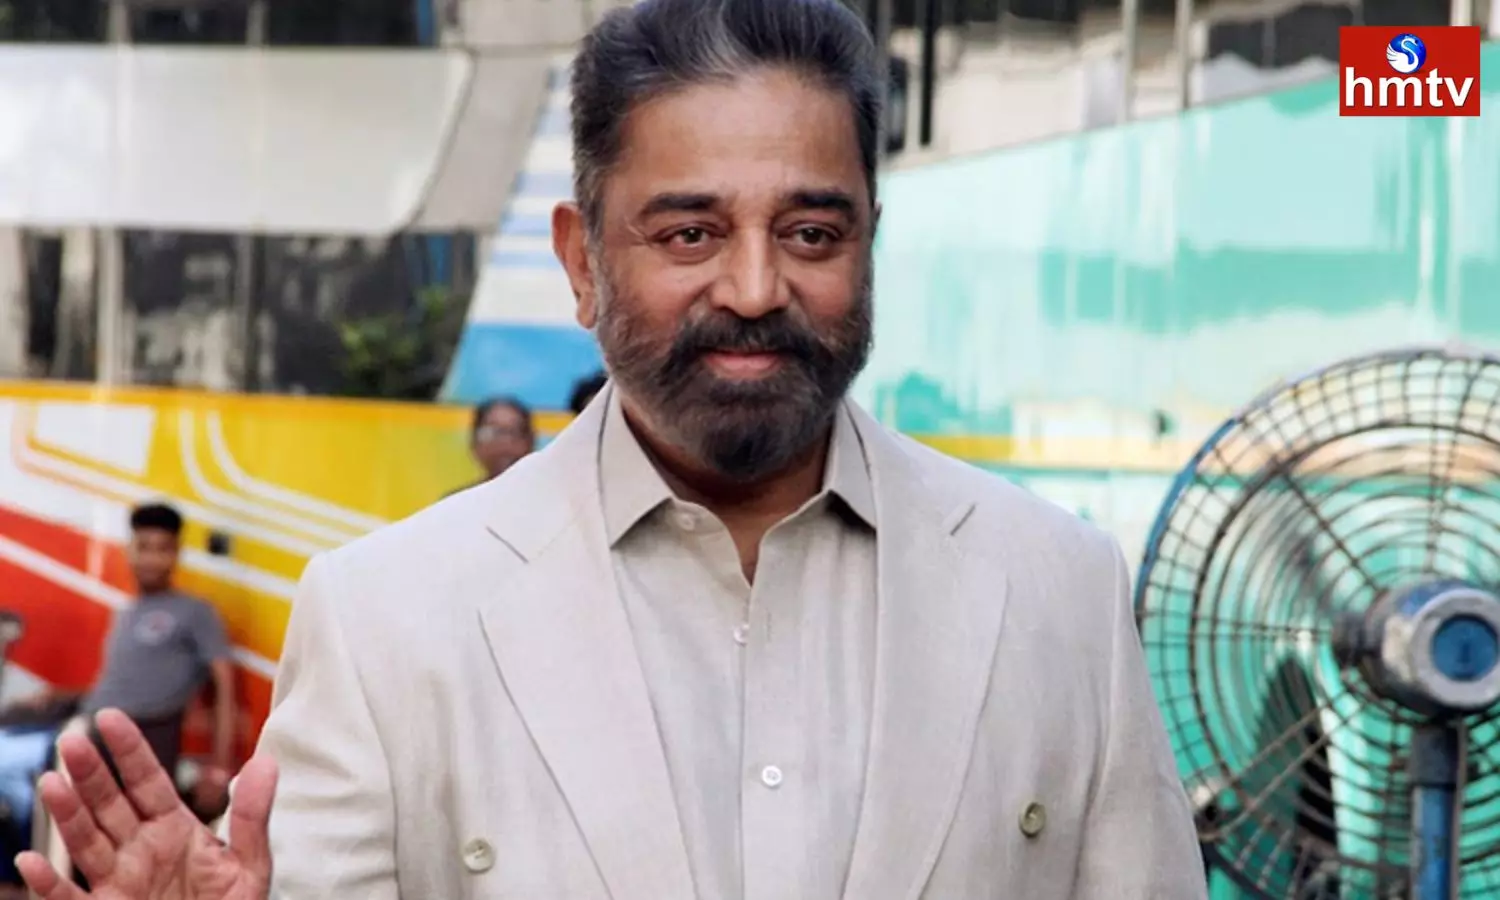 Actor Kamal Haasan is unwell Difficulty breathing along with fever